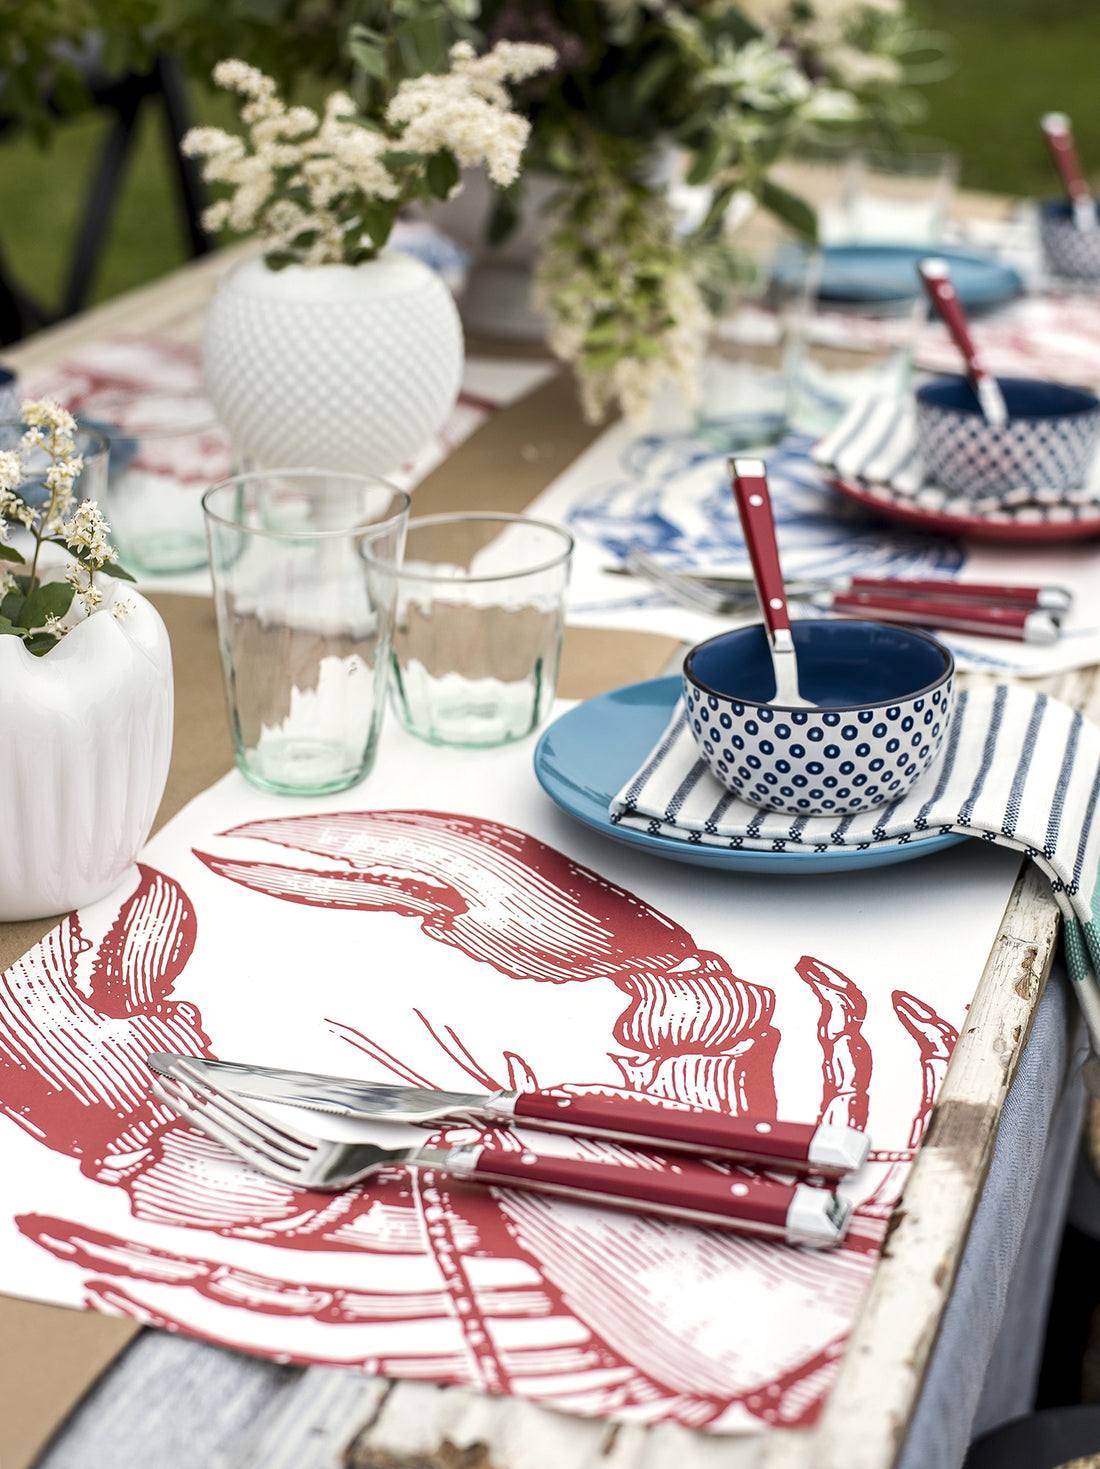 The Lobster Paper Placemat under a nautical-themed table setting.